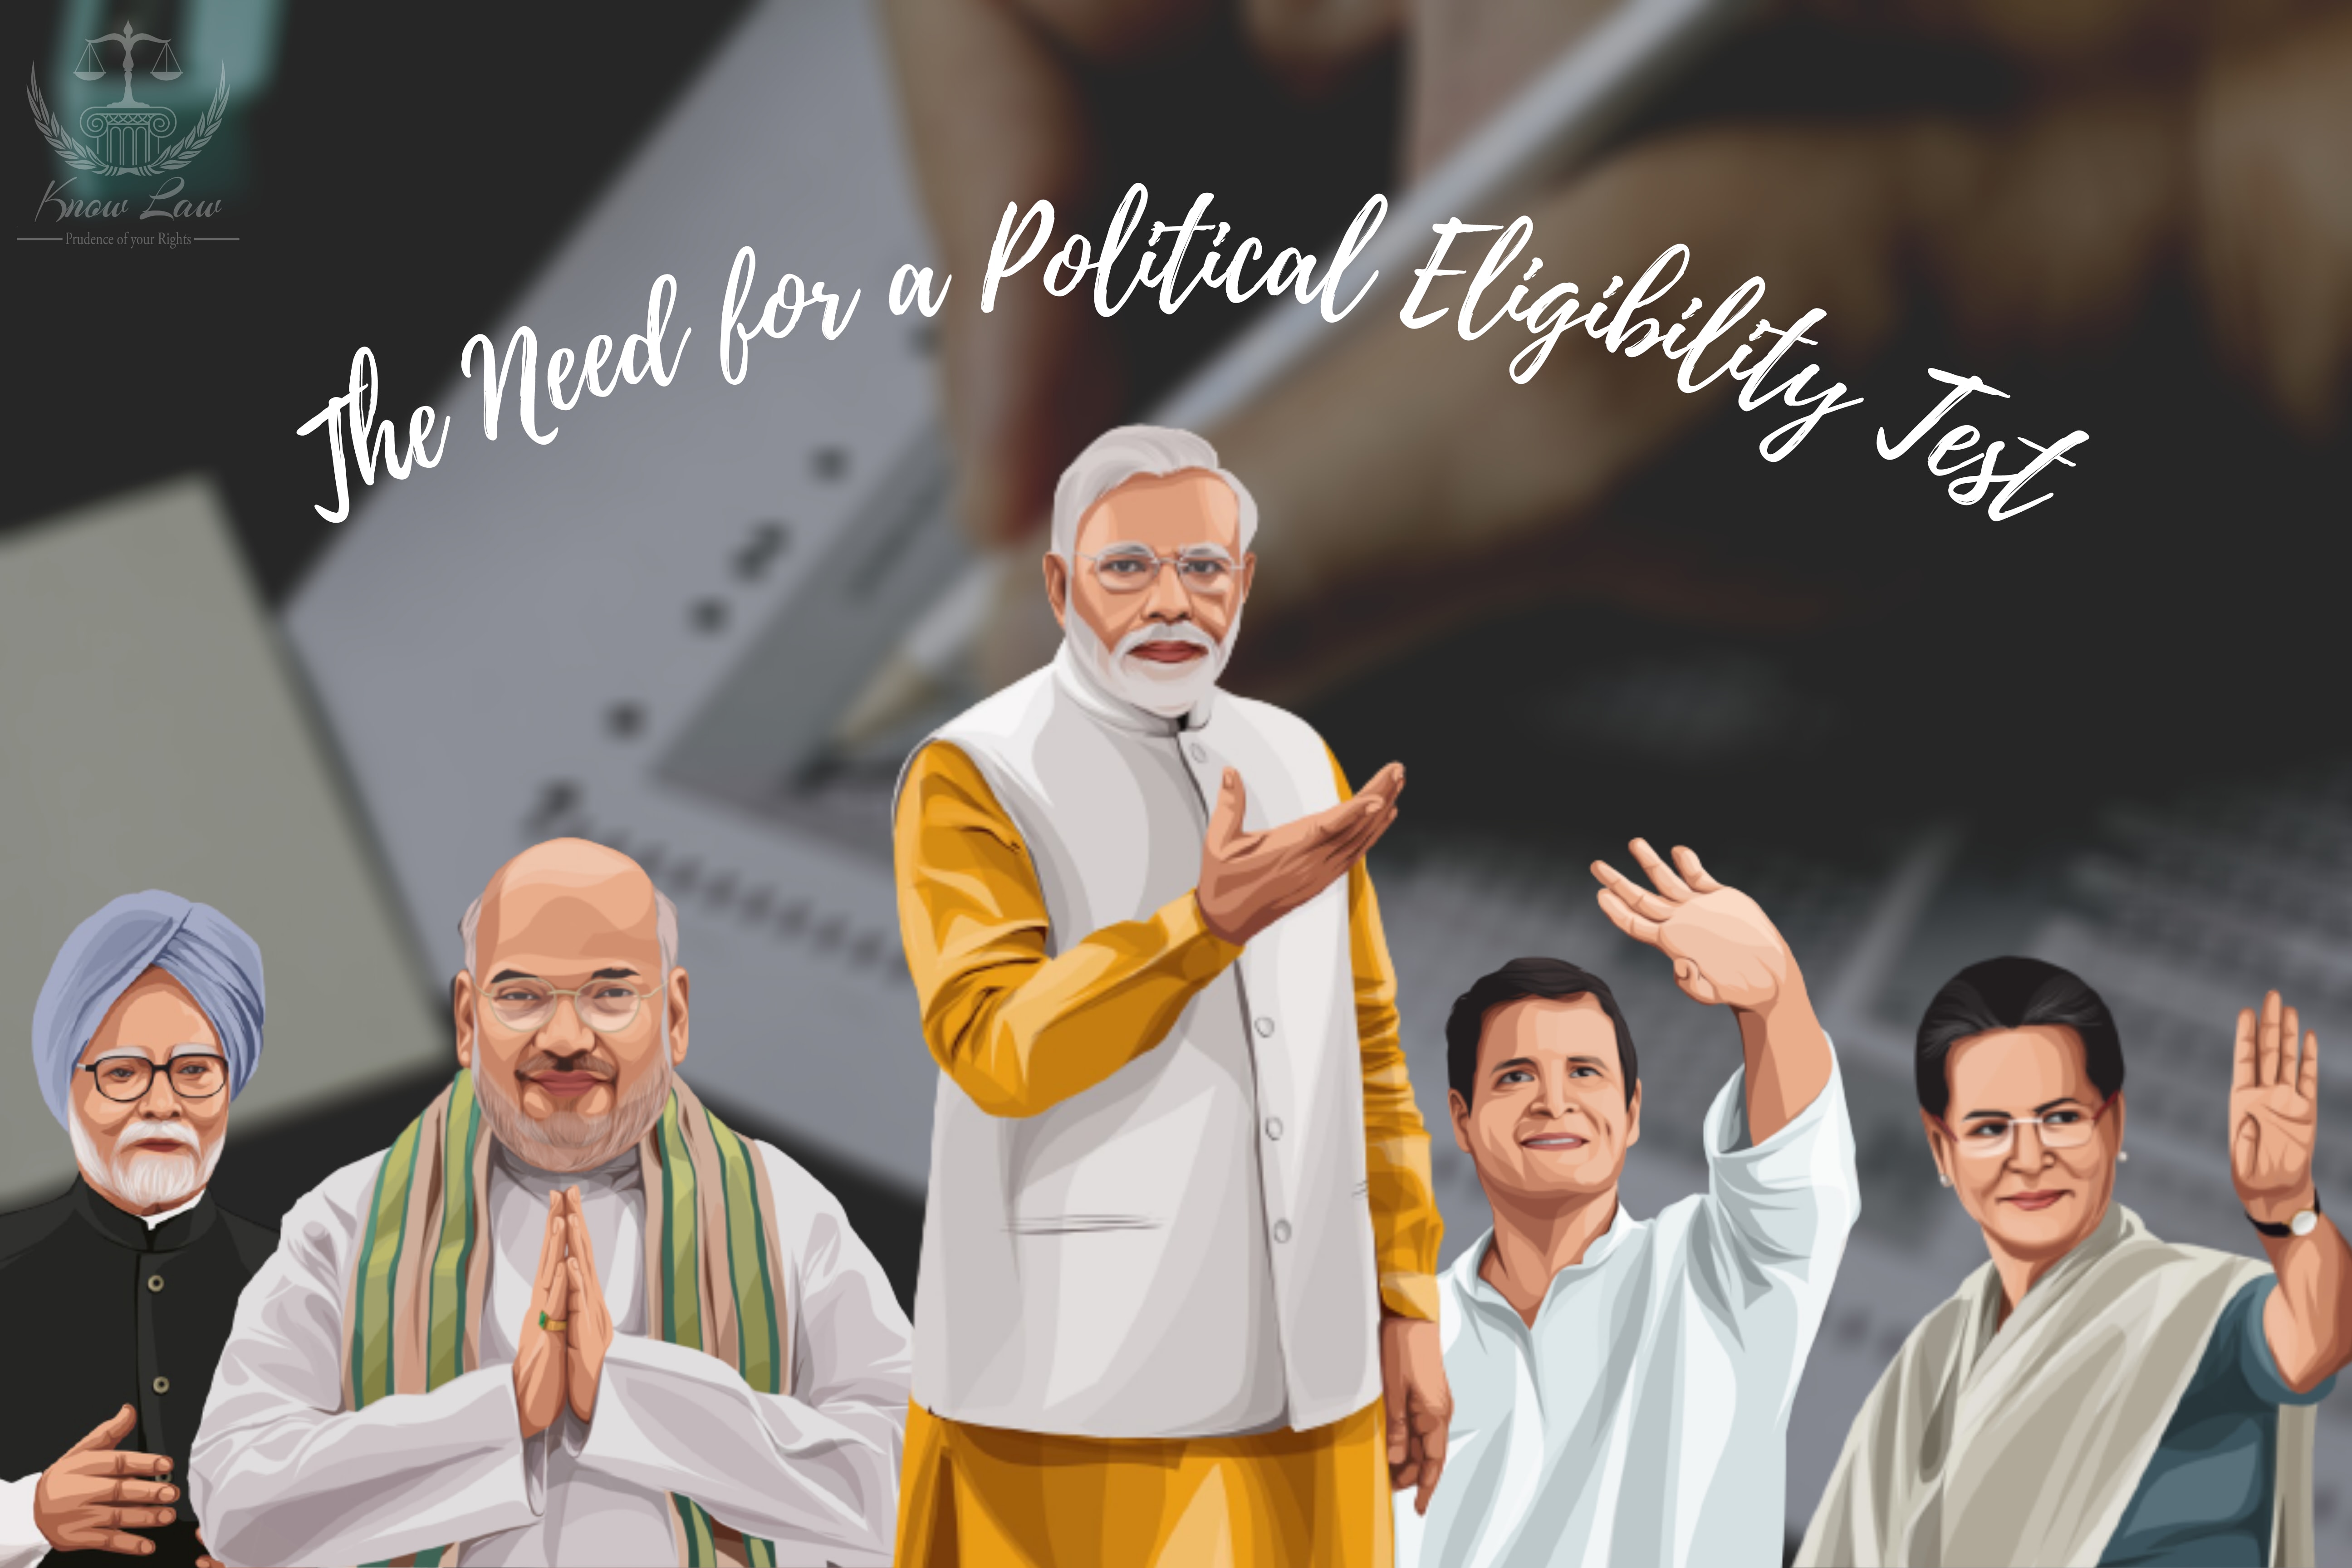 Is India in the hands of the Eligible ones? – The need for Political Eligibility Test